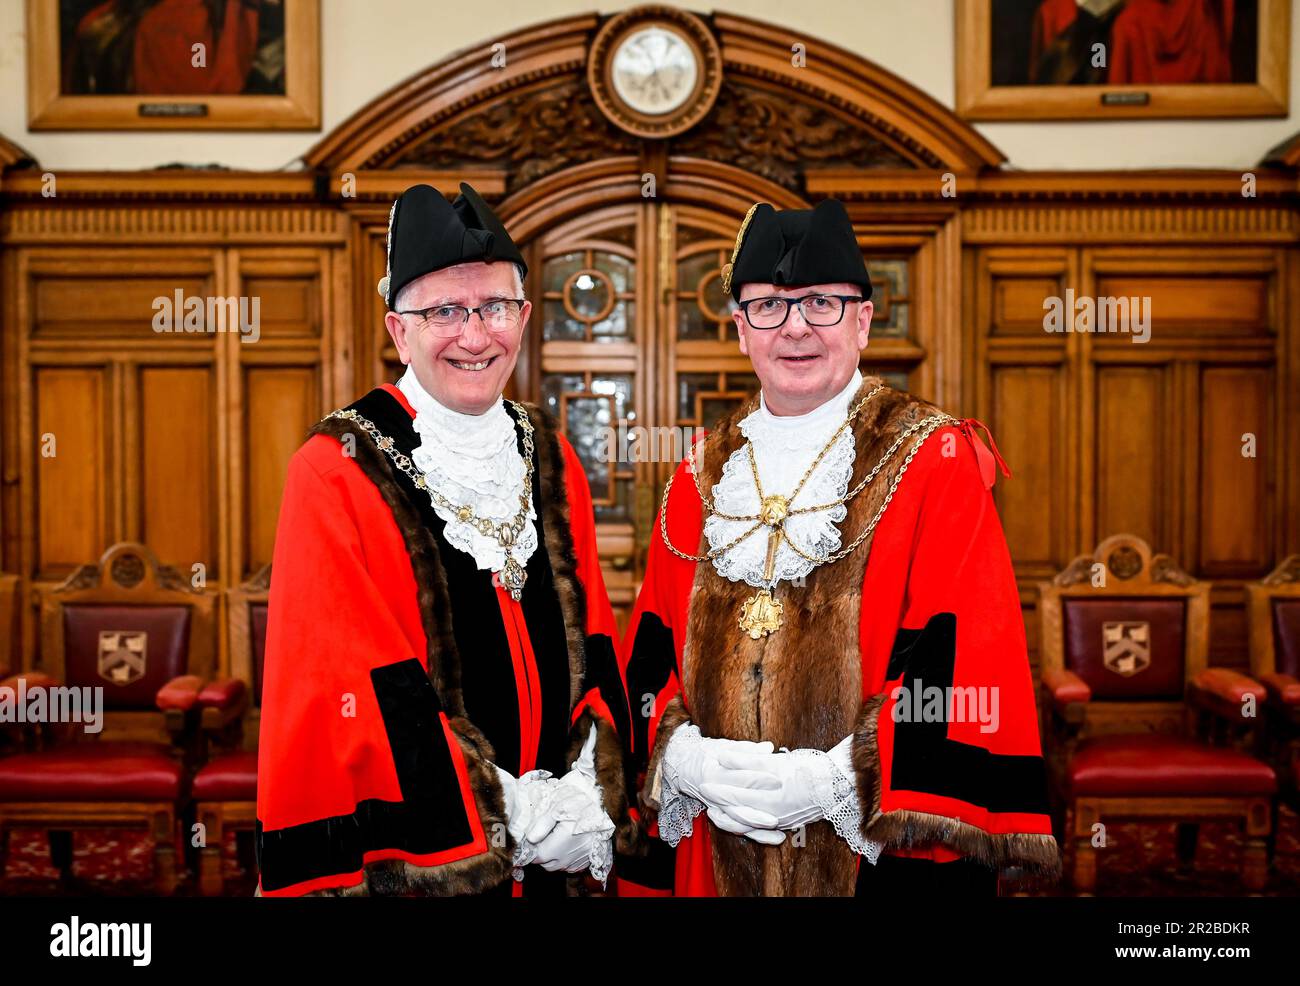 Grimsby, UK, 18th May, 2023. Newly elected Mayor, Councillor Ian Lindley, right, and Deputy Mayor Councillor Steve Beasant, during the annual North East Lincolnshire Council Mayor-Making ceremony held at Grimsby Town Hall.Councillor Ian Lindley was elected to the role of Mayor of the Borough of North East Lincolnshire, with Councillor Steve Beasant elected to Deputy Mayor of the Borough. 18th May 2023 Photo by Jon Corken, Grimsby Town Hall, Grimsby, UK. Credit: Jon Corken/Alamy Live News Stock Photo